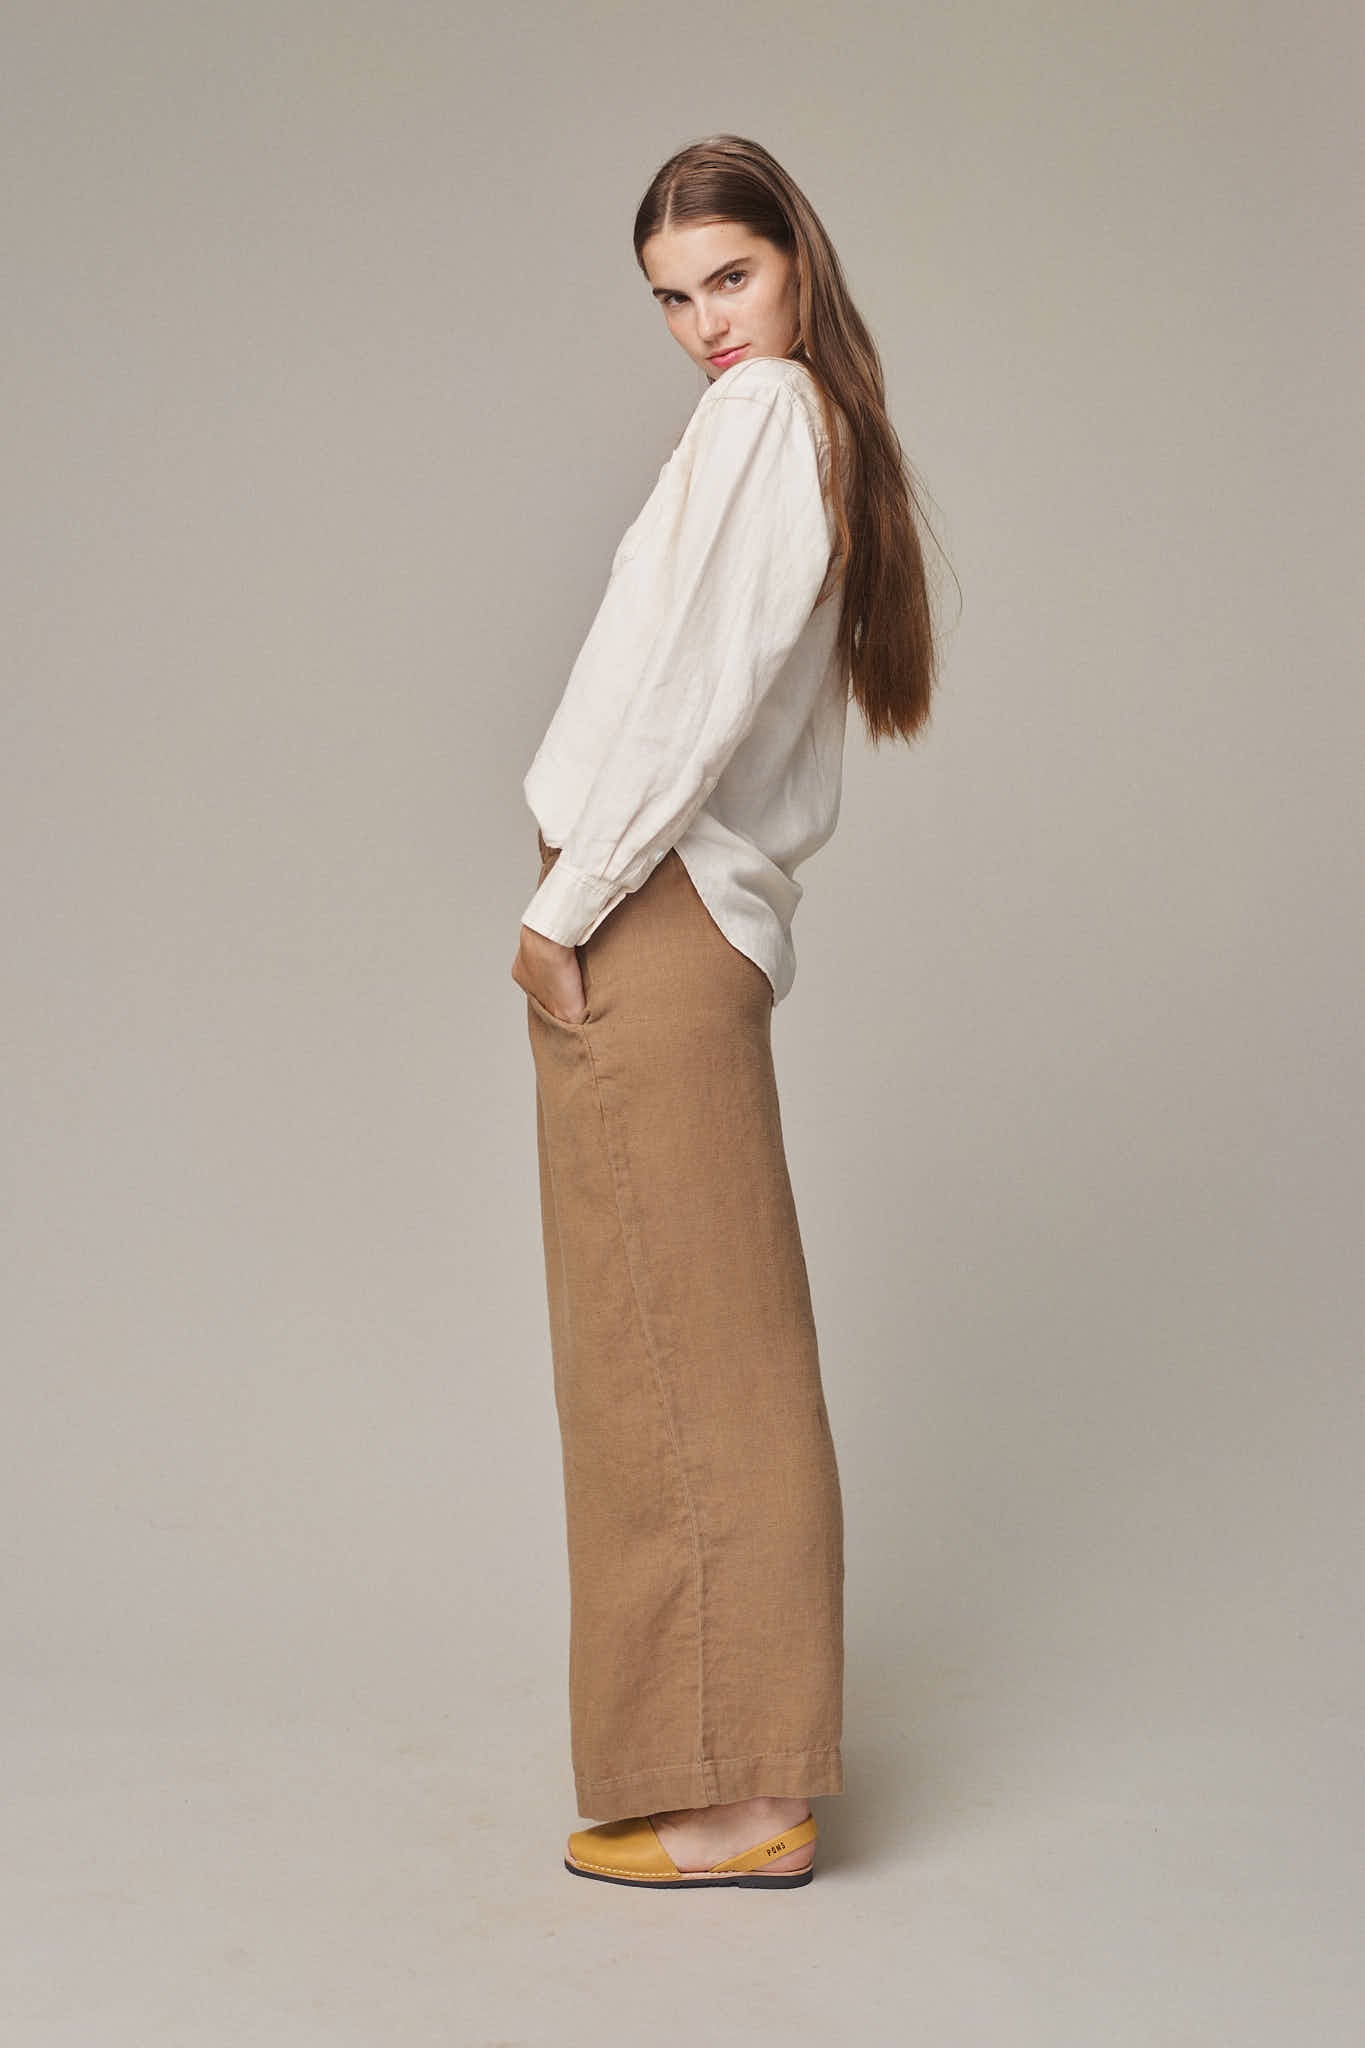 Camrbia pant. Effortlessly stylish with a flattering wide leg and mid-rise fit. The carefully woven 100% hemp results in a linen feel and elegant drape. A wardrobe staple, this versatile pant looks chic paired with everything from swimsuits to blazers. Sustainably made in Los Angeles.